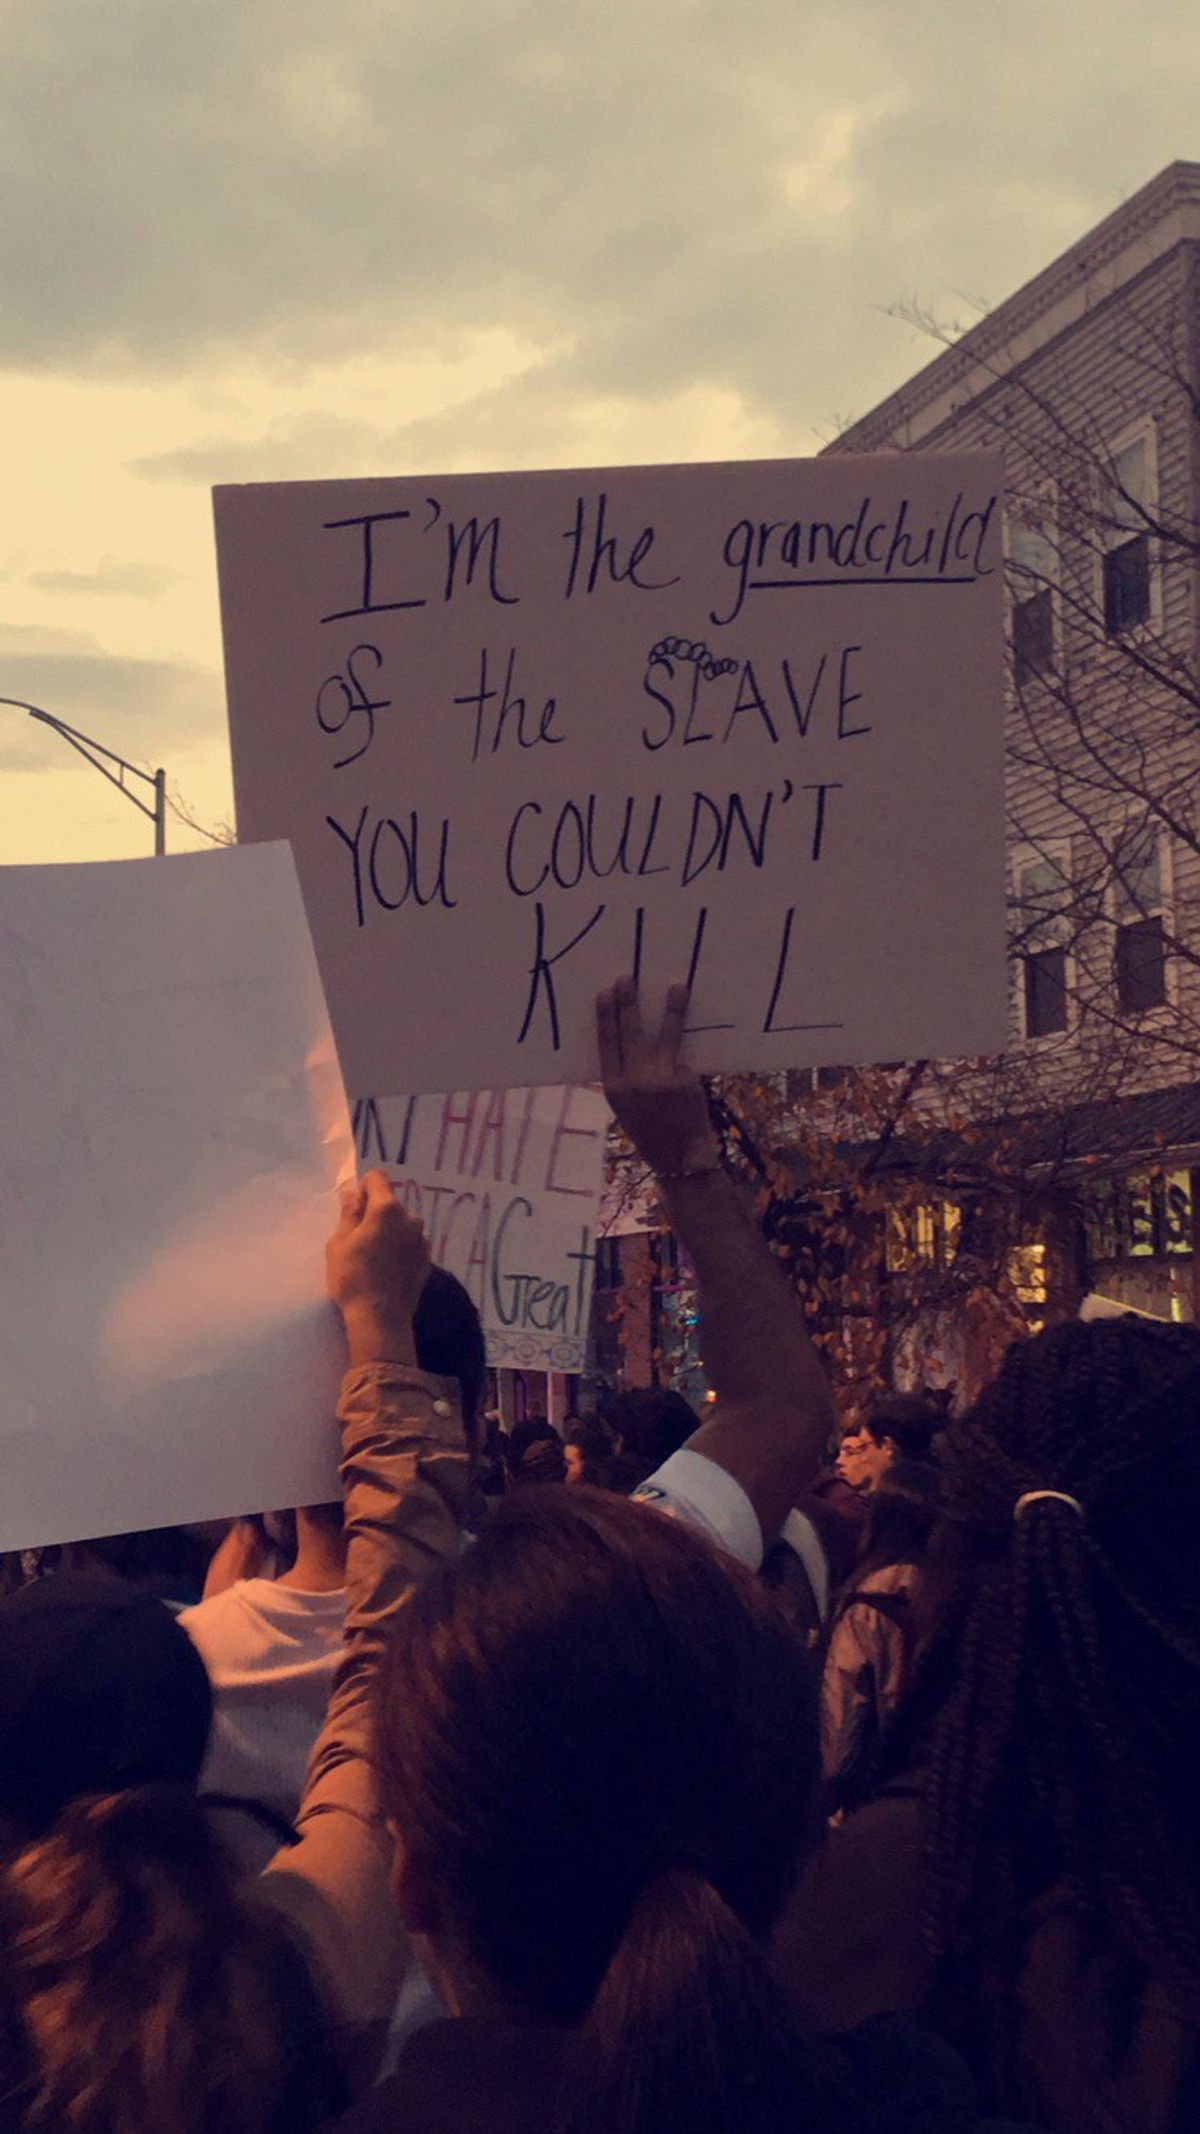 First-Hand Accounts of Rutgers Anti-Trump Protest